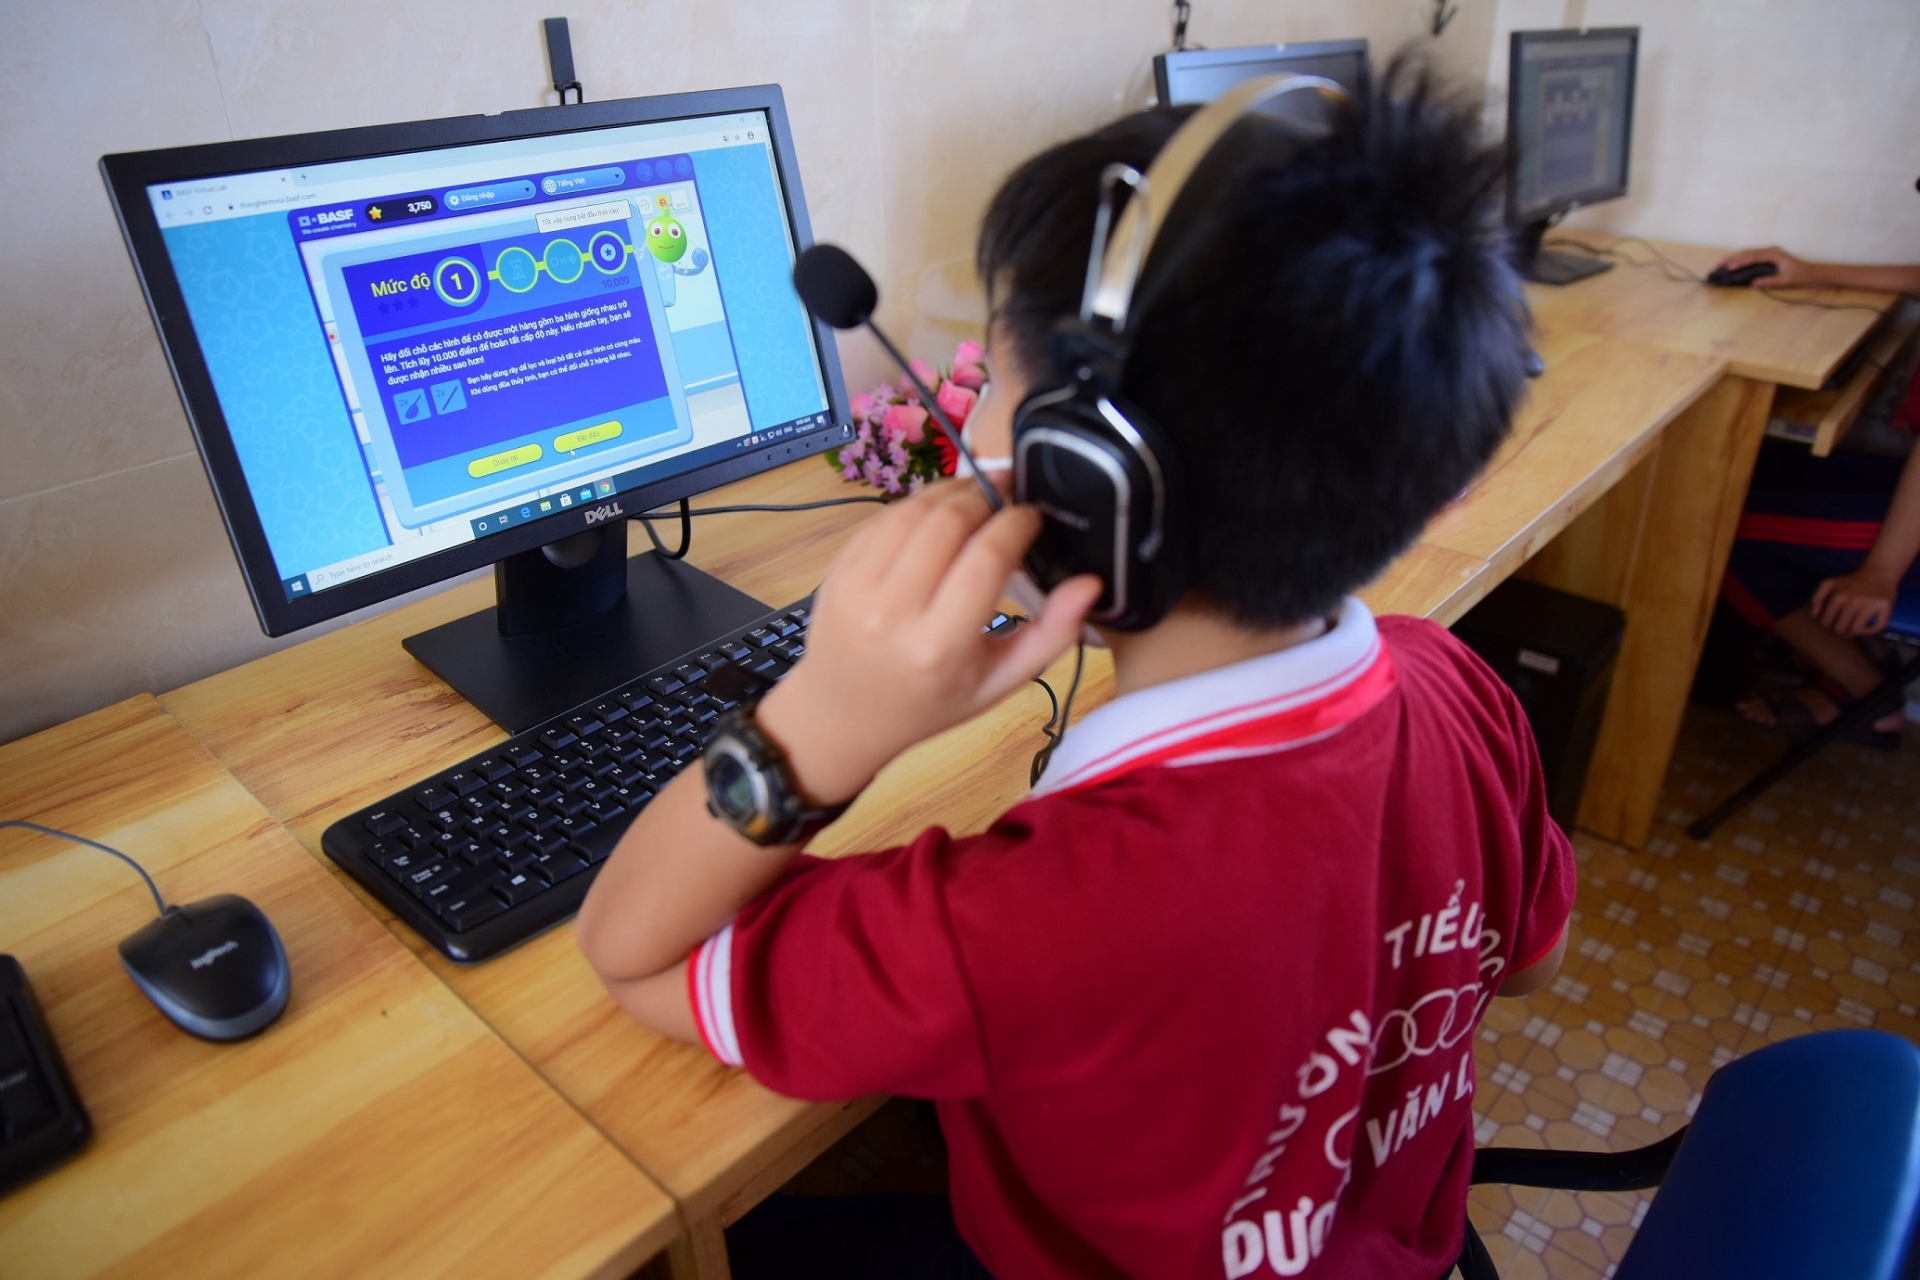 BASF Virtual Lab offers two additional science experiments in Vietnamese